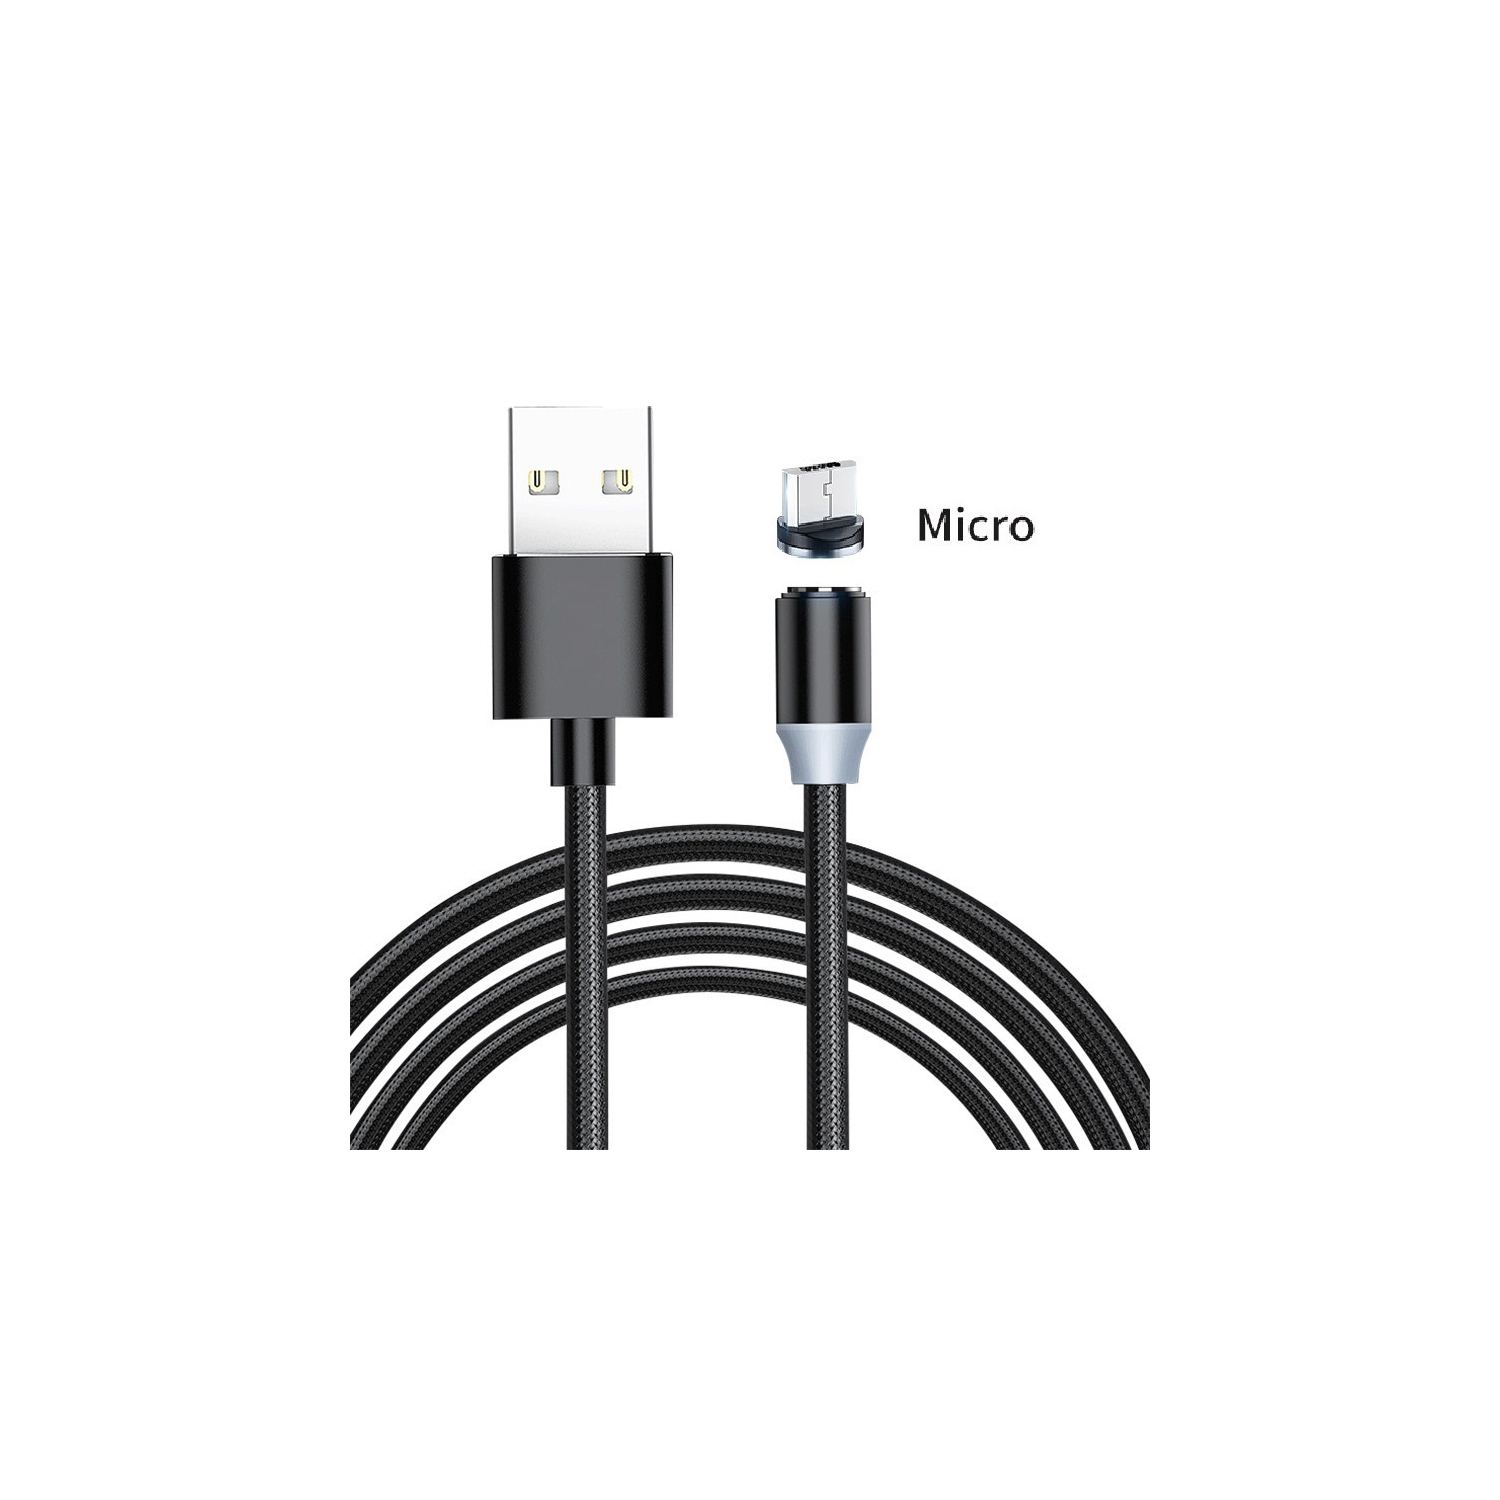 Magnetic Metal Adapter Charger Micro USB Charge & Sync Cable for Samsung / LG / Android